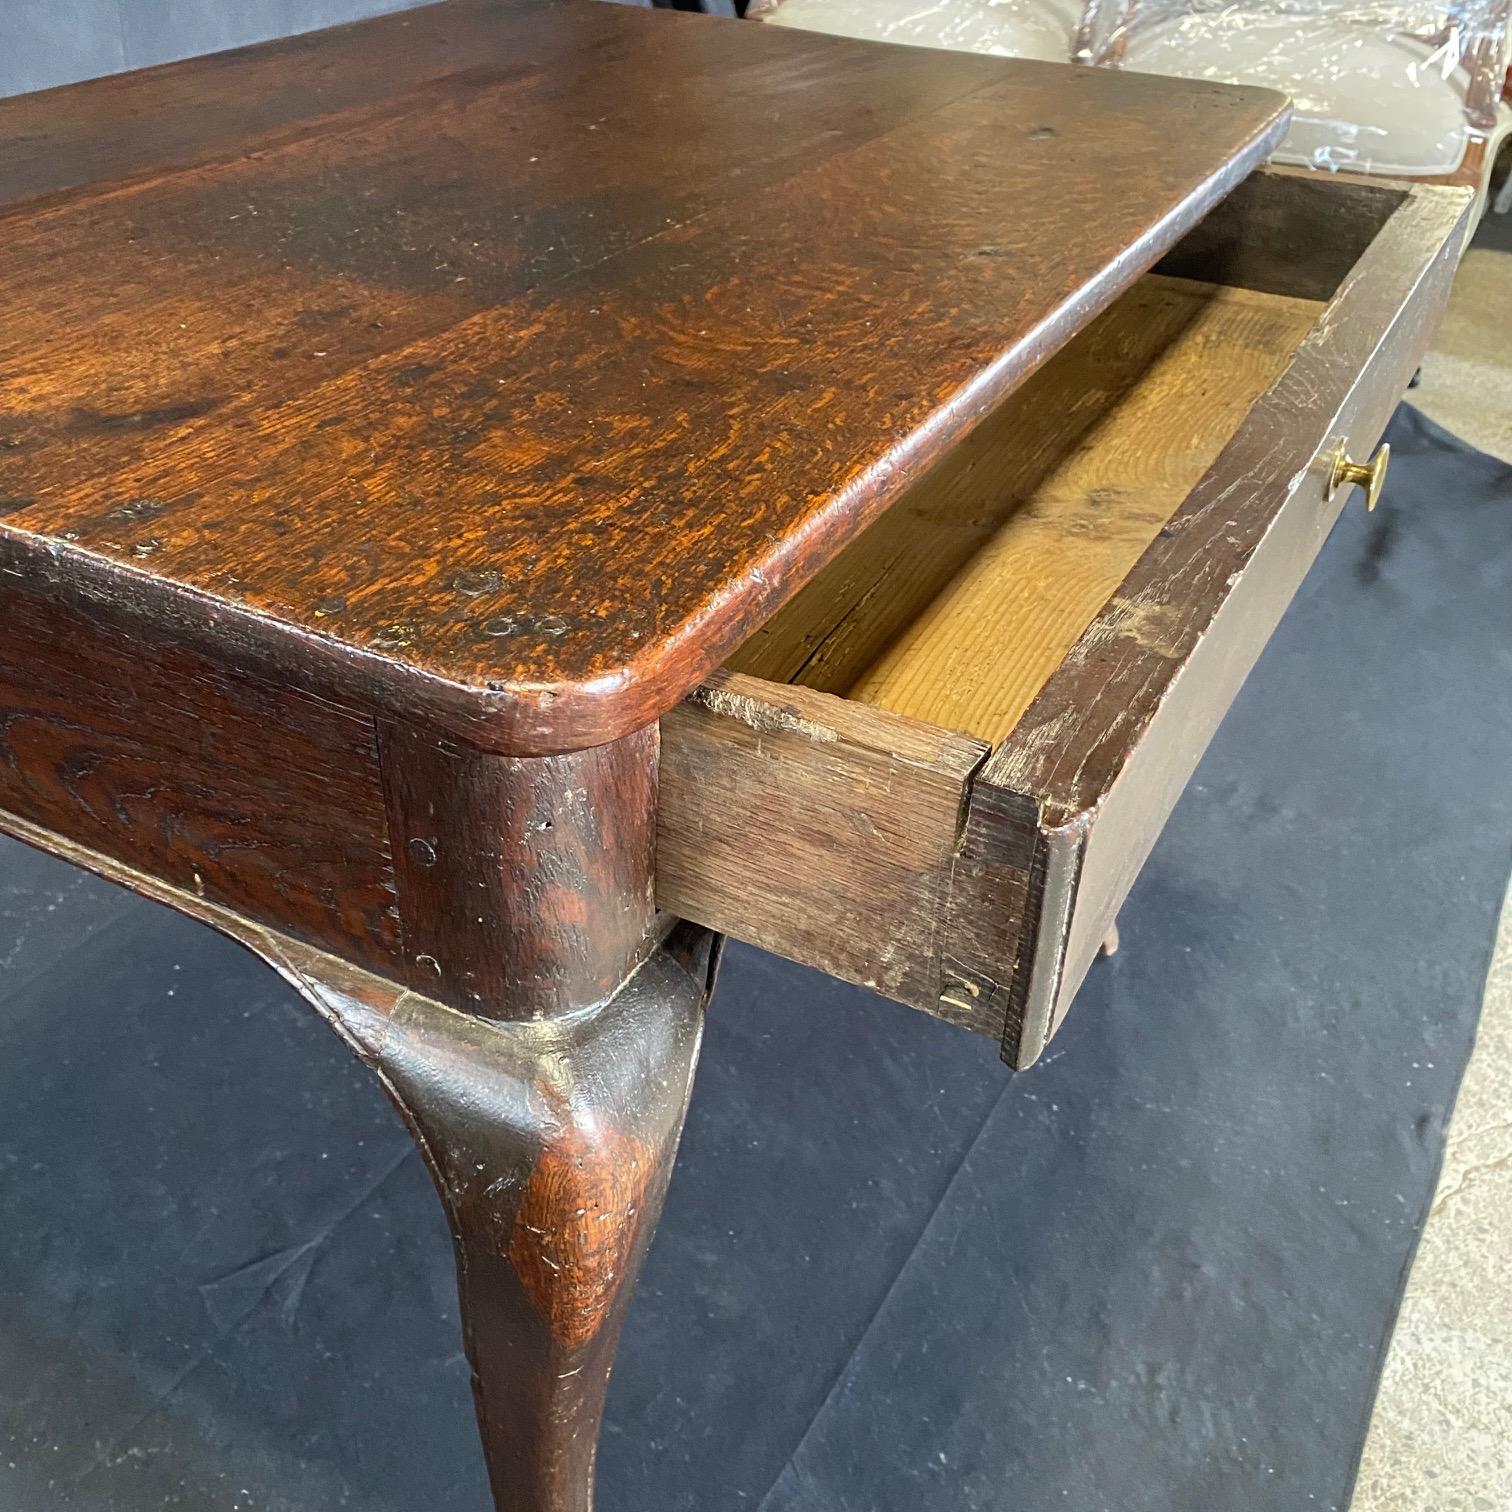 Elegant Louis XV side table or smaller scale desk bought in Avignon, France. Solid oak with one drawer and early peg joinery, this classy French side table rests upon four lovely hooved feet. #6002

H skirt 24”.
 